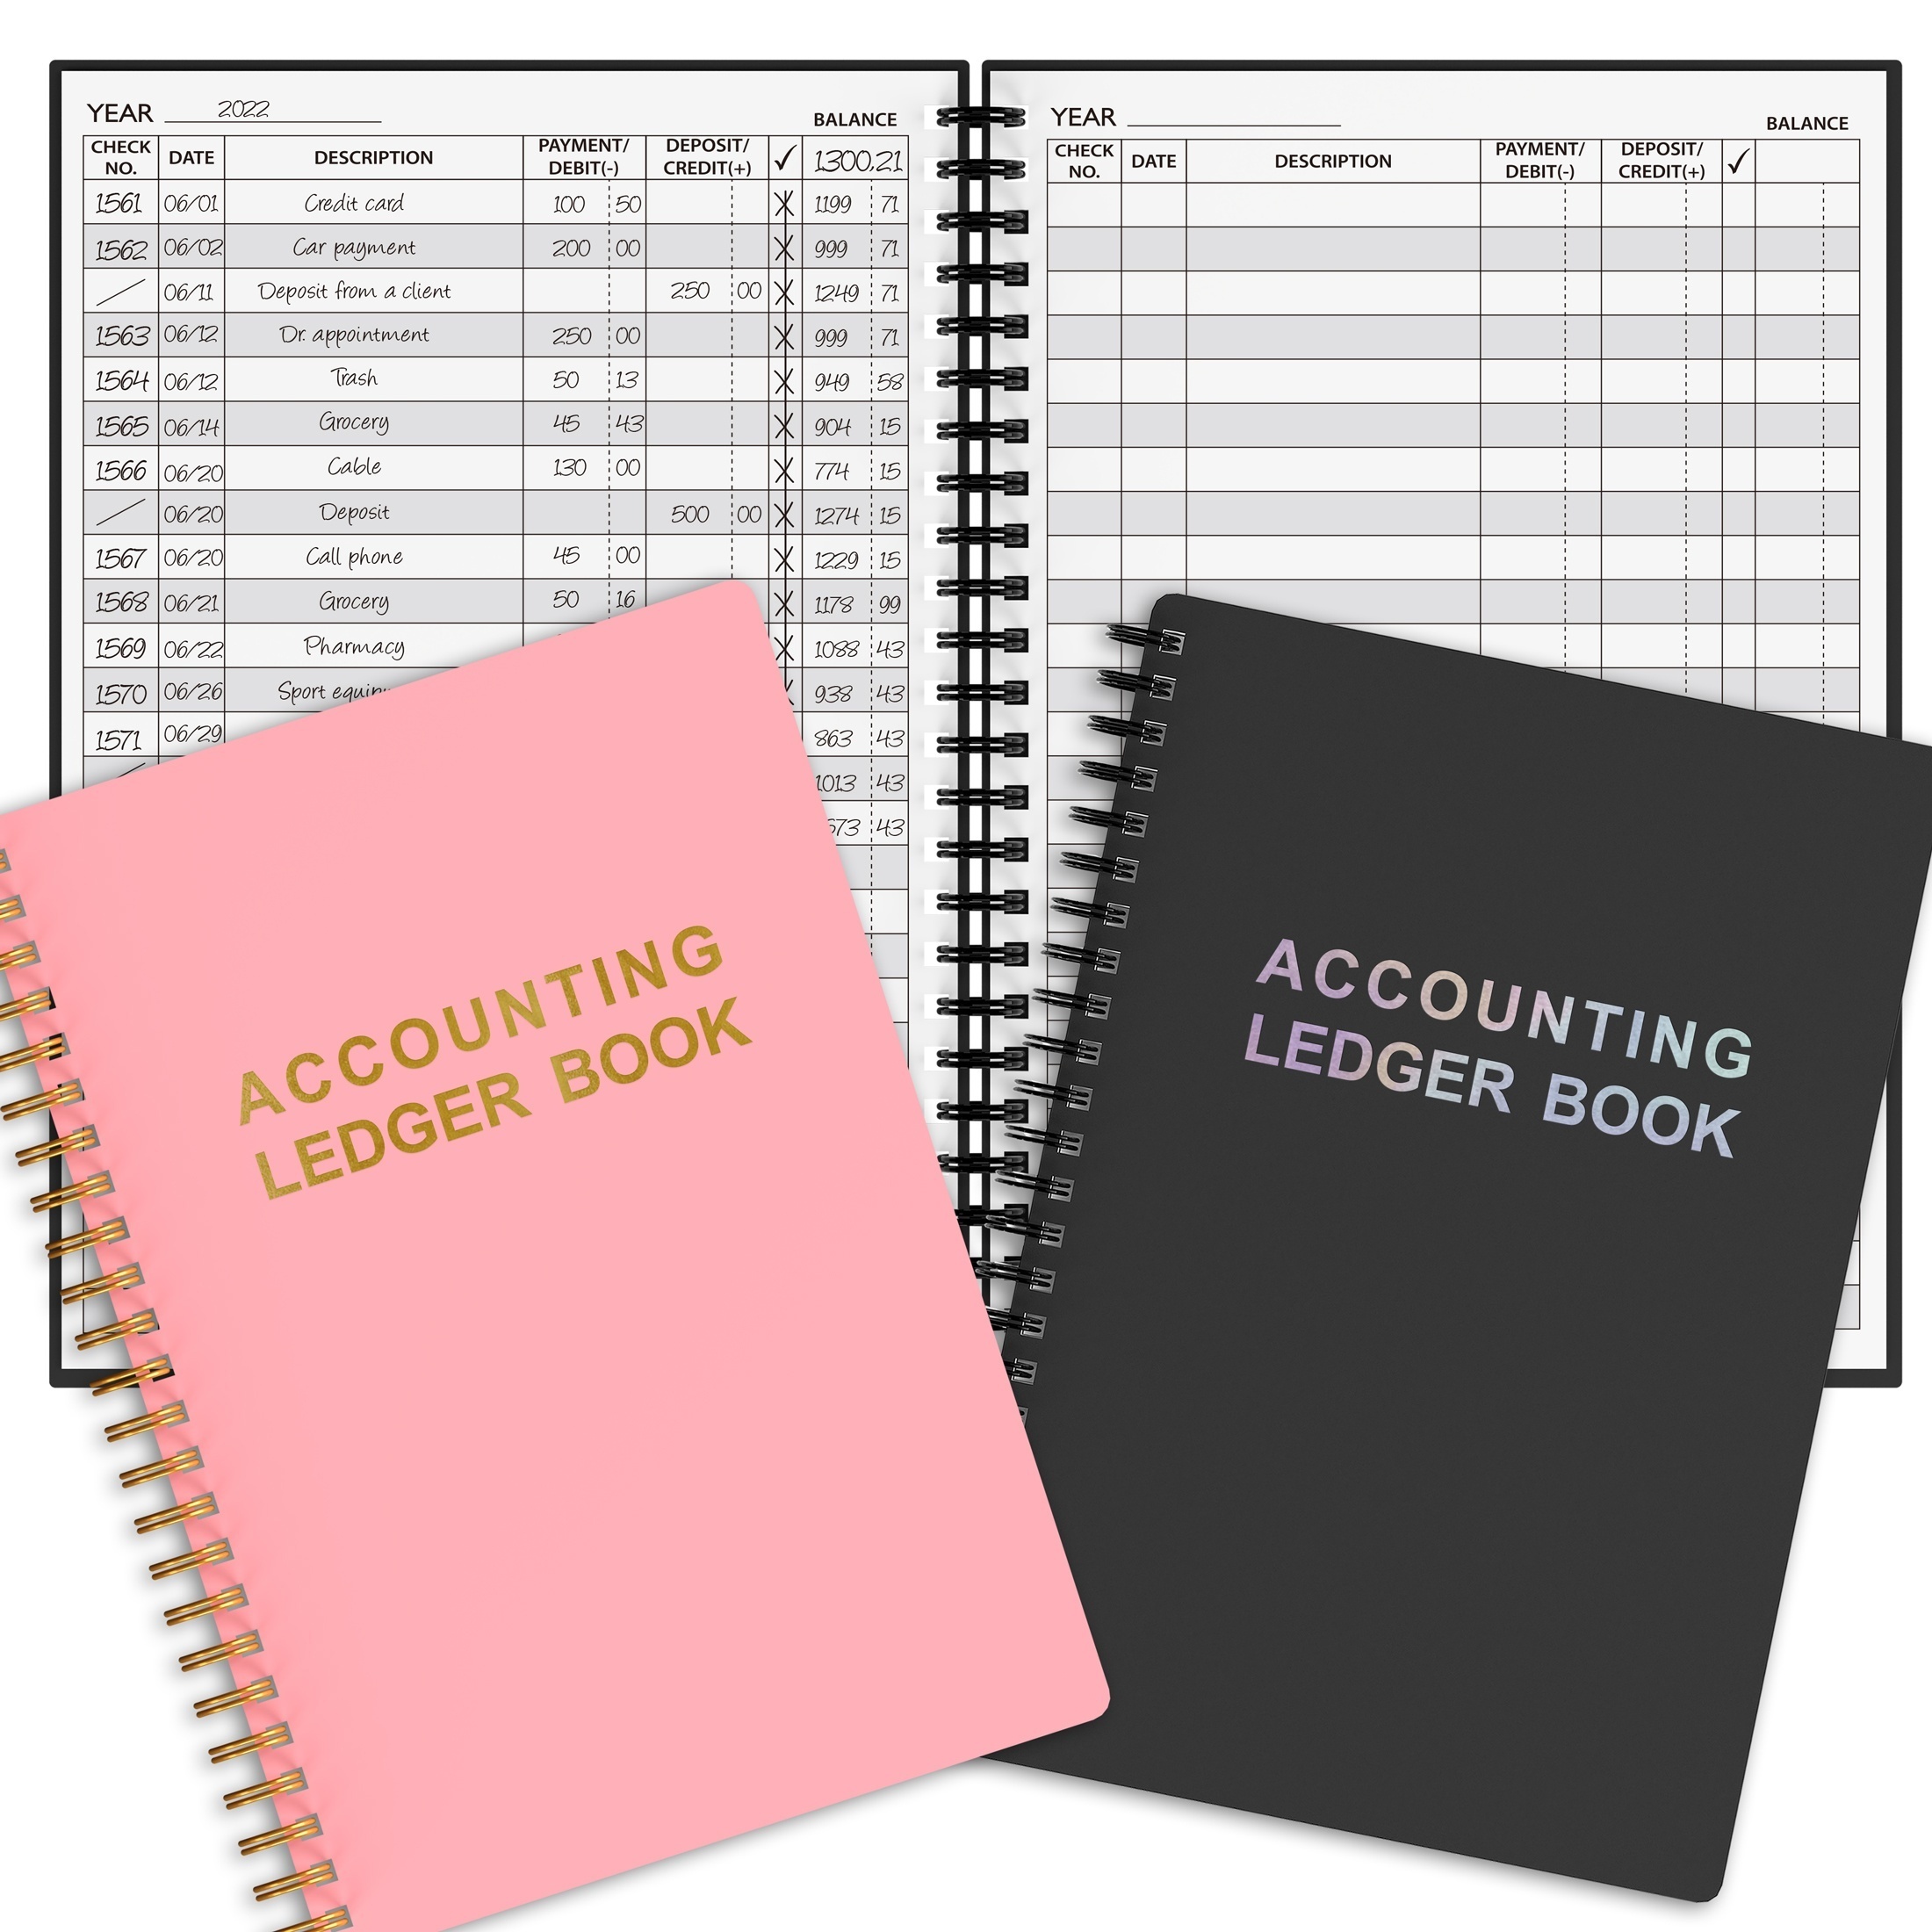 

Accounting Ledger Book - A5 Check Register For Small Businesses & Personal Use, Account Book For Tracking Money, Expenses, Deposits & Balance, 5.8" X 8.6"